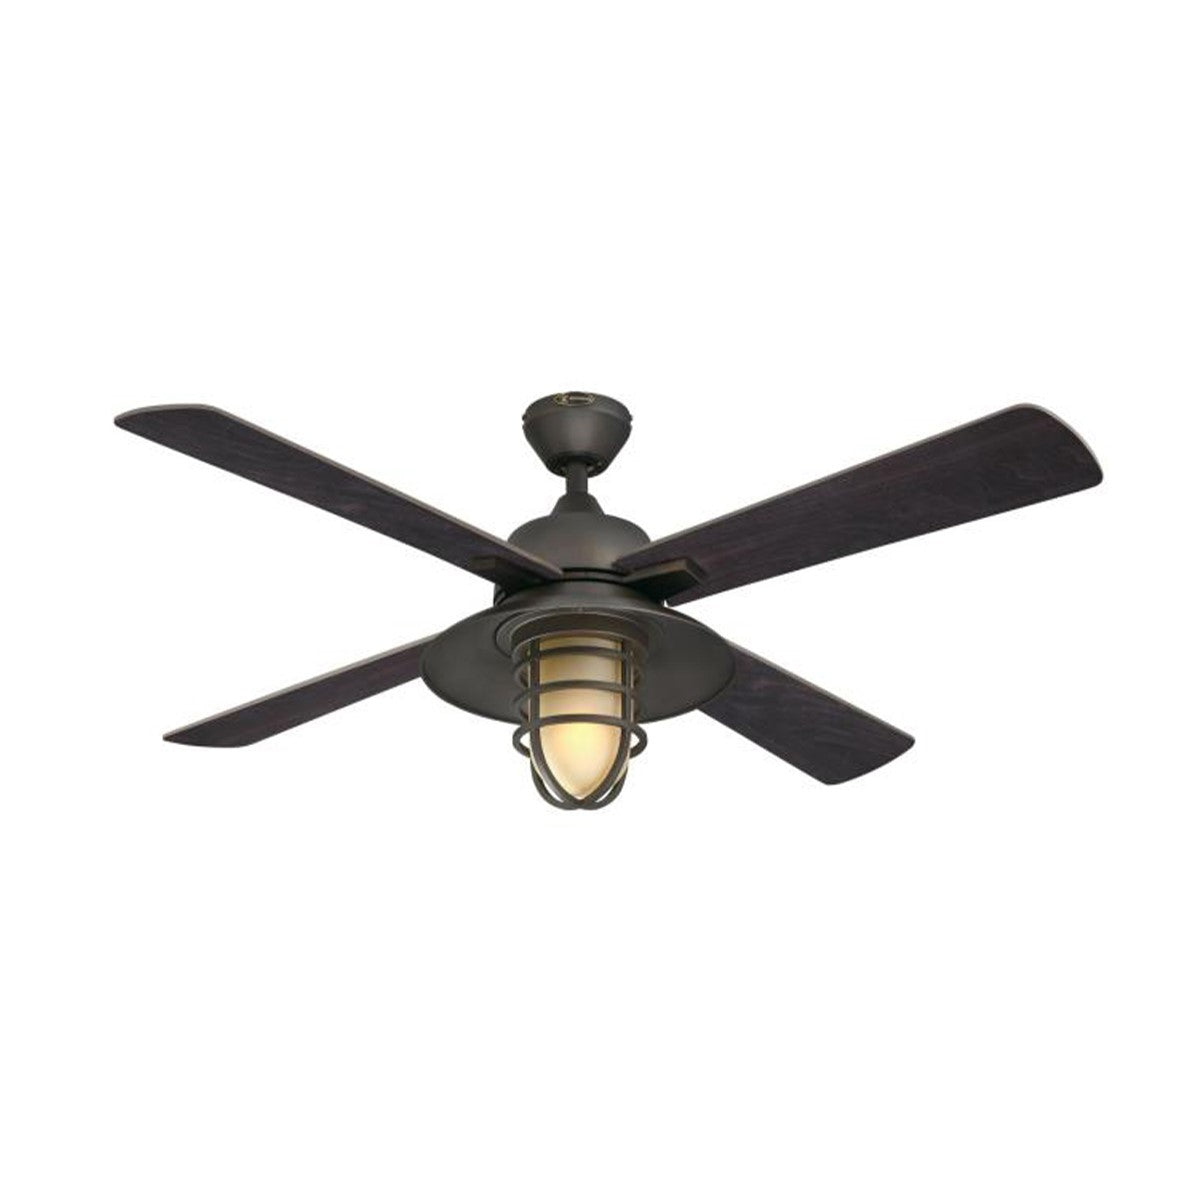 Porto 52 Inch Rustic Caged Smart Ceiling Fan With Light And Remote, Black/Bronze Finish - Bees Lighting